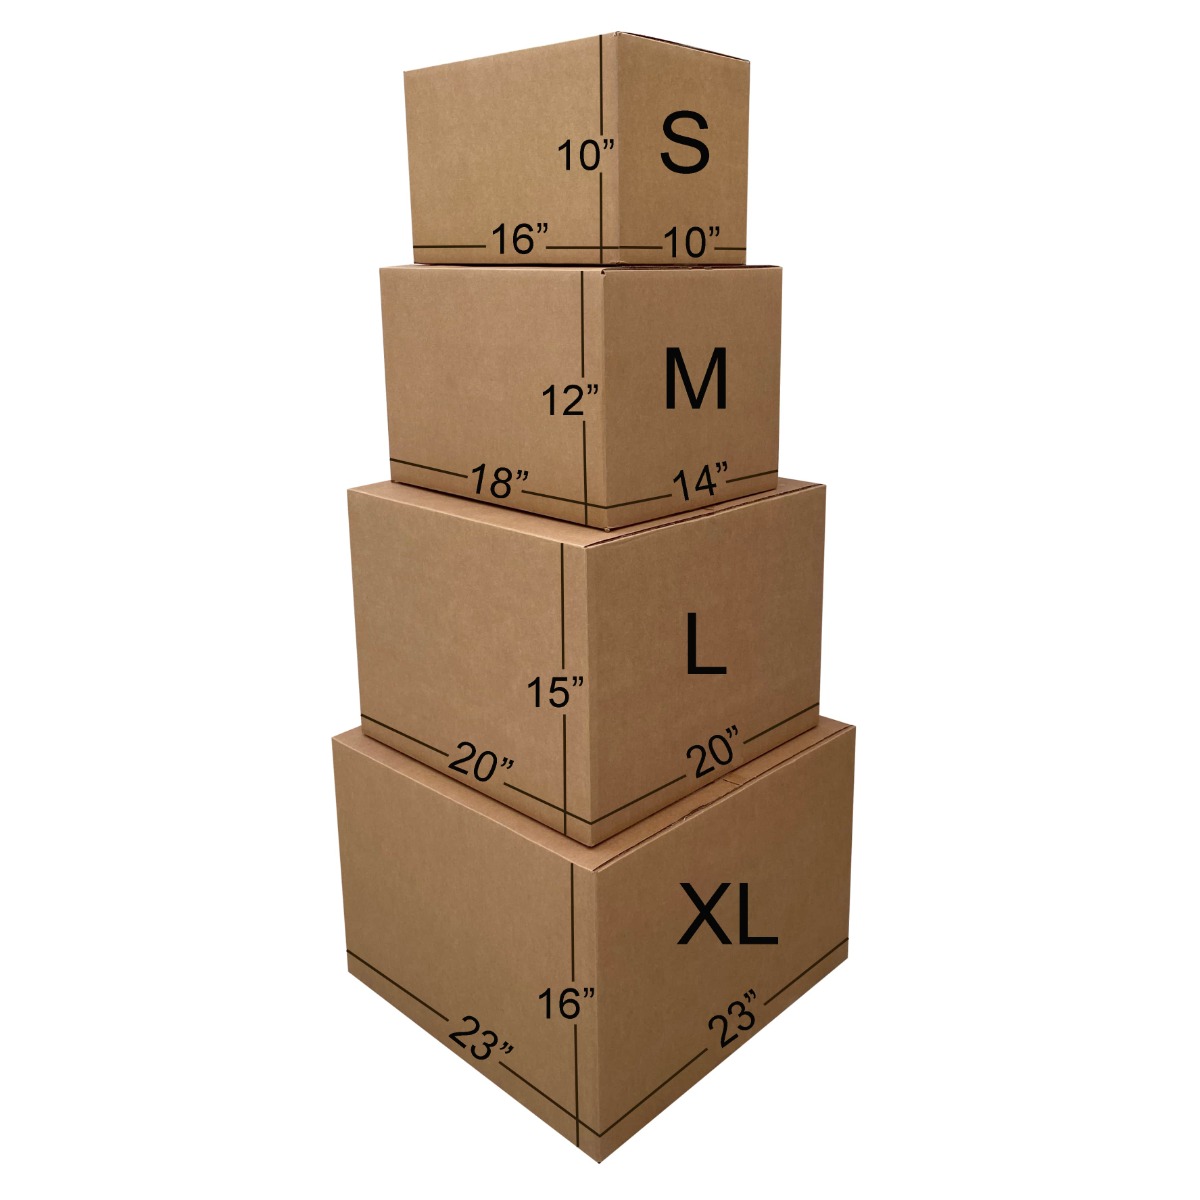 uBmove uBoxes Basic Moving Box Kit for 5 Bedrooms 58 Boxes &amp; Packing Materials